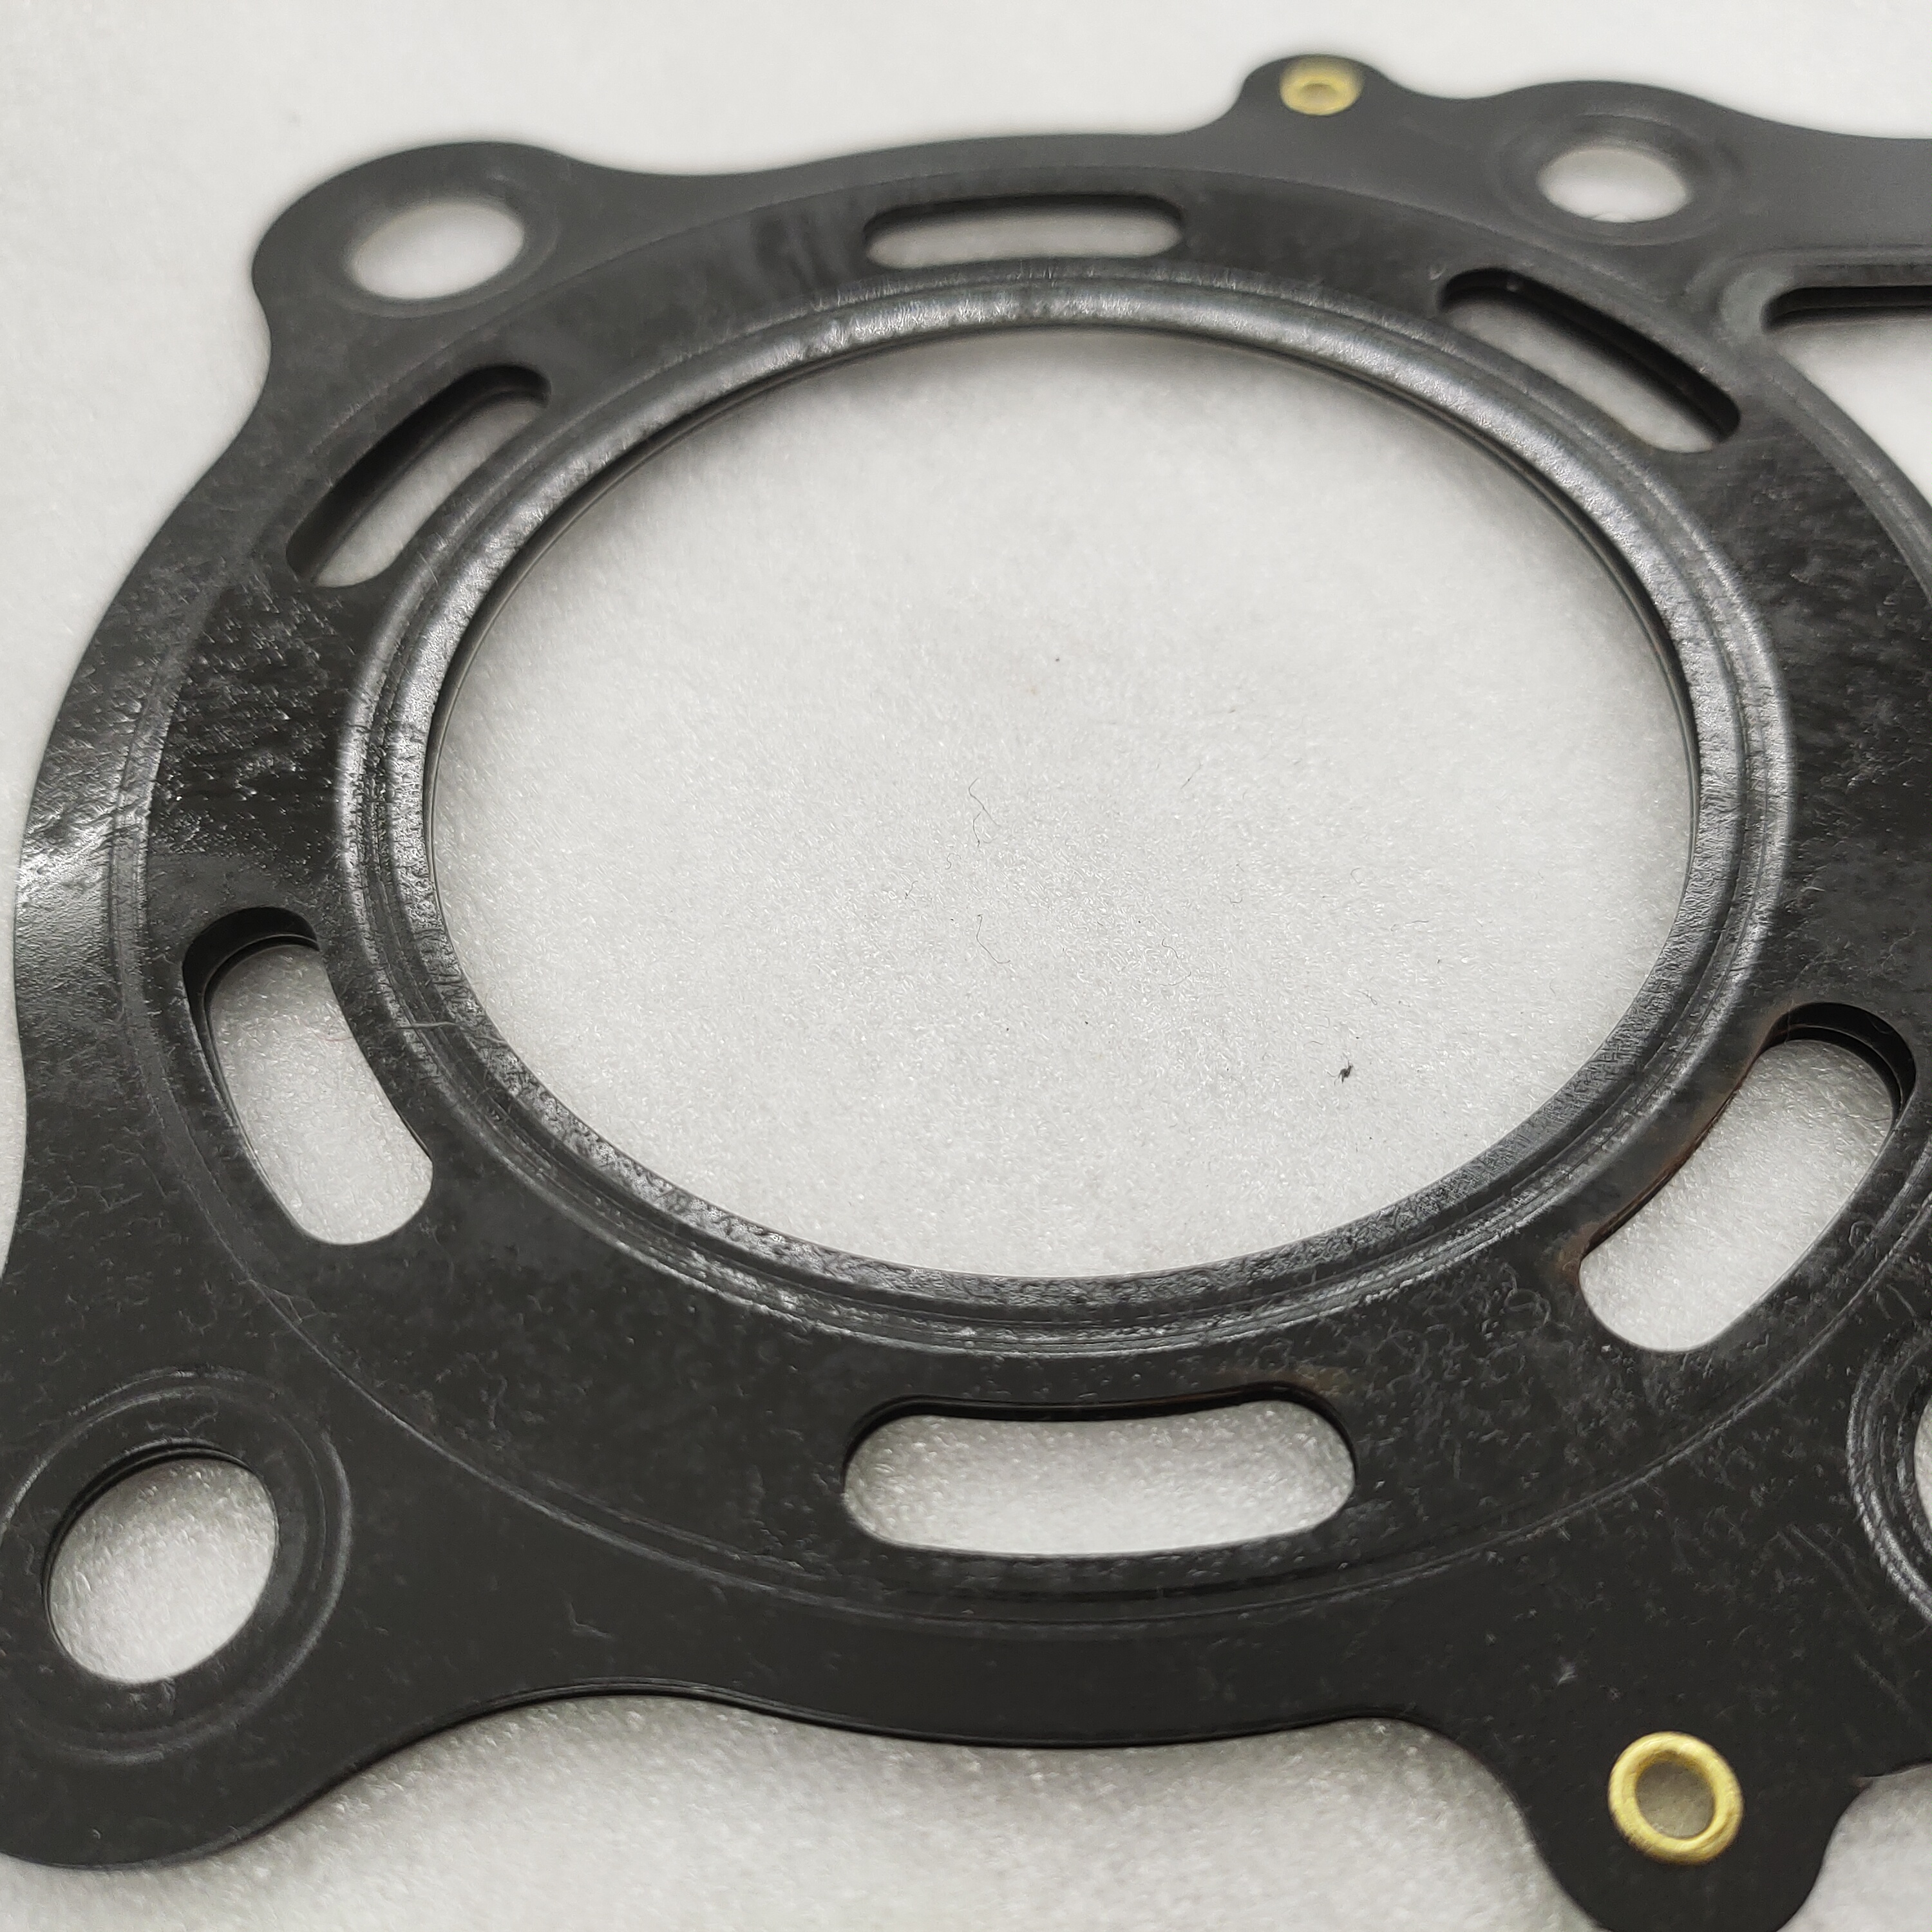 DAYANG Motorcycle Engine Parts Cylinder Head gasket Oem Quality Parts Motorcycle Origin Type High Warranty Product